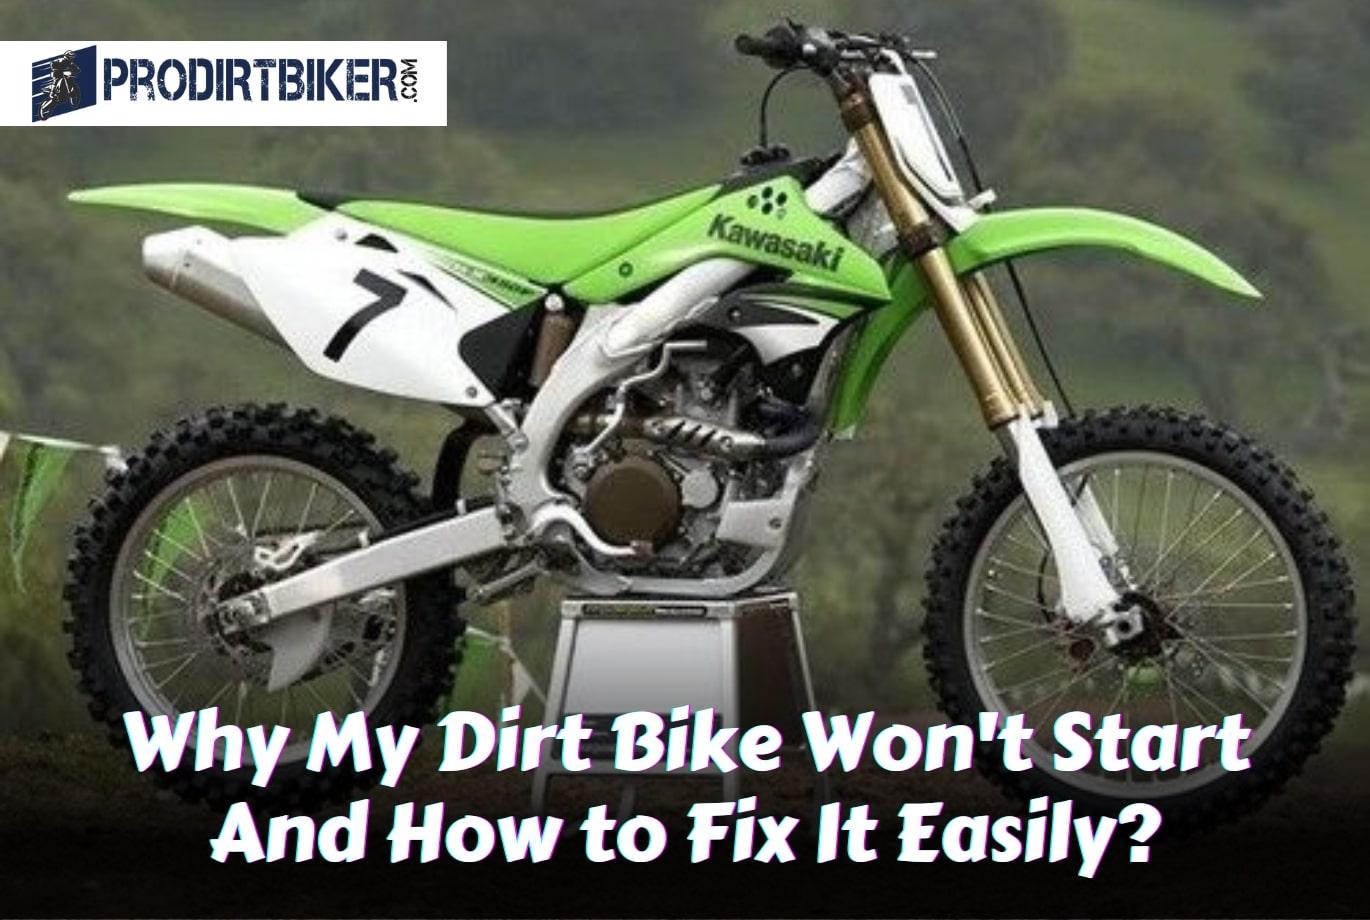 Why My Dirt Bike Won't Start And How to Fix It Easily?